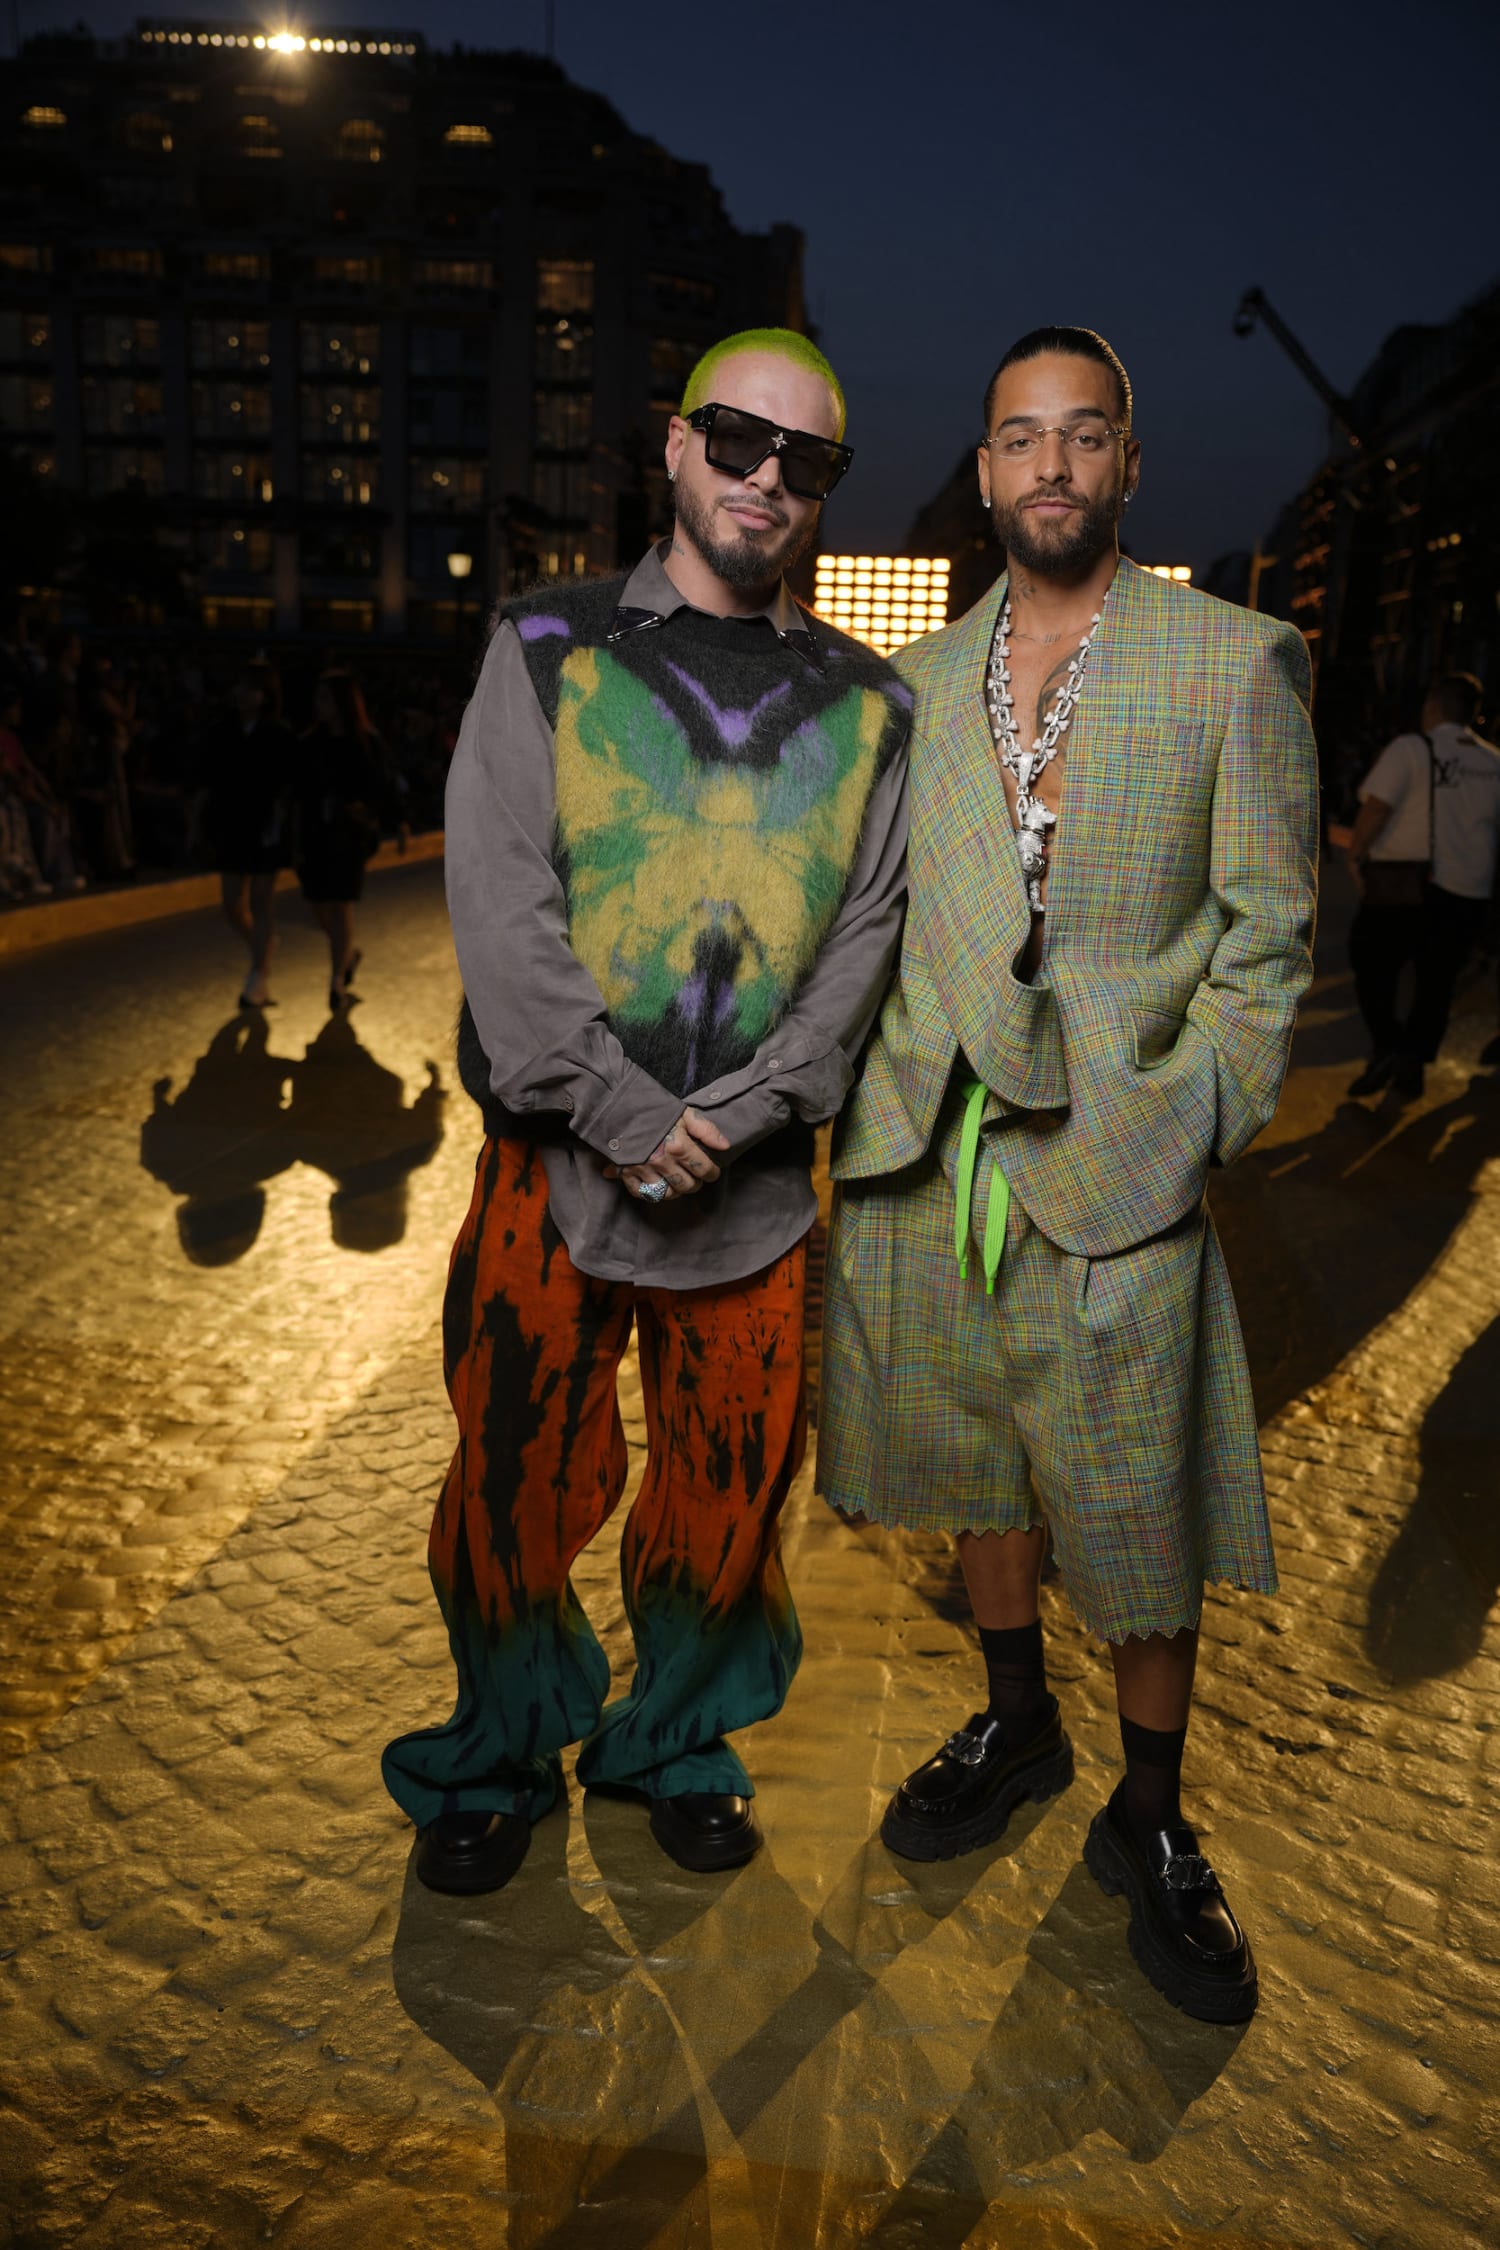 See All the Celeb Photos From the Louis Vuitton Men's Show